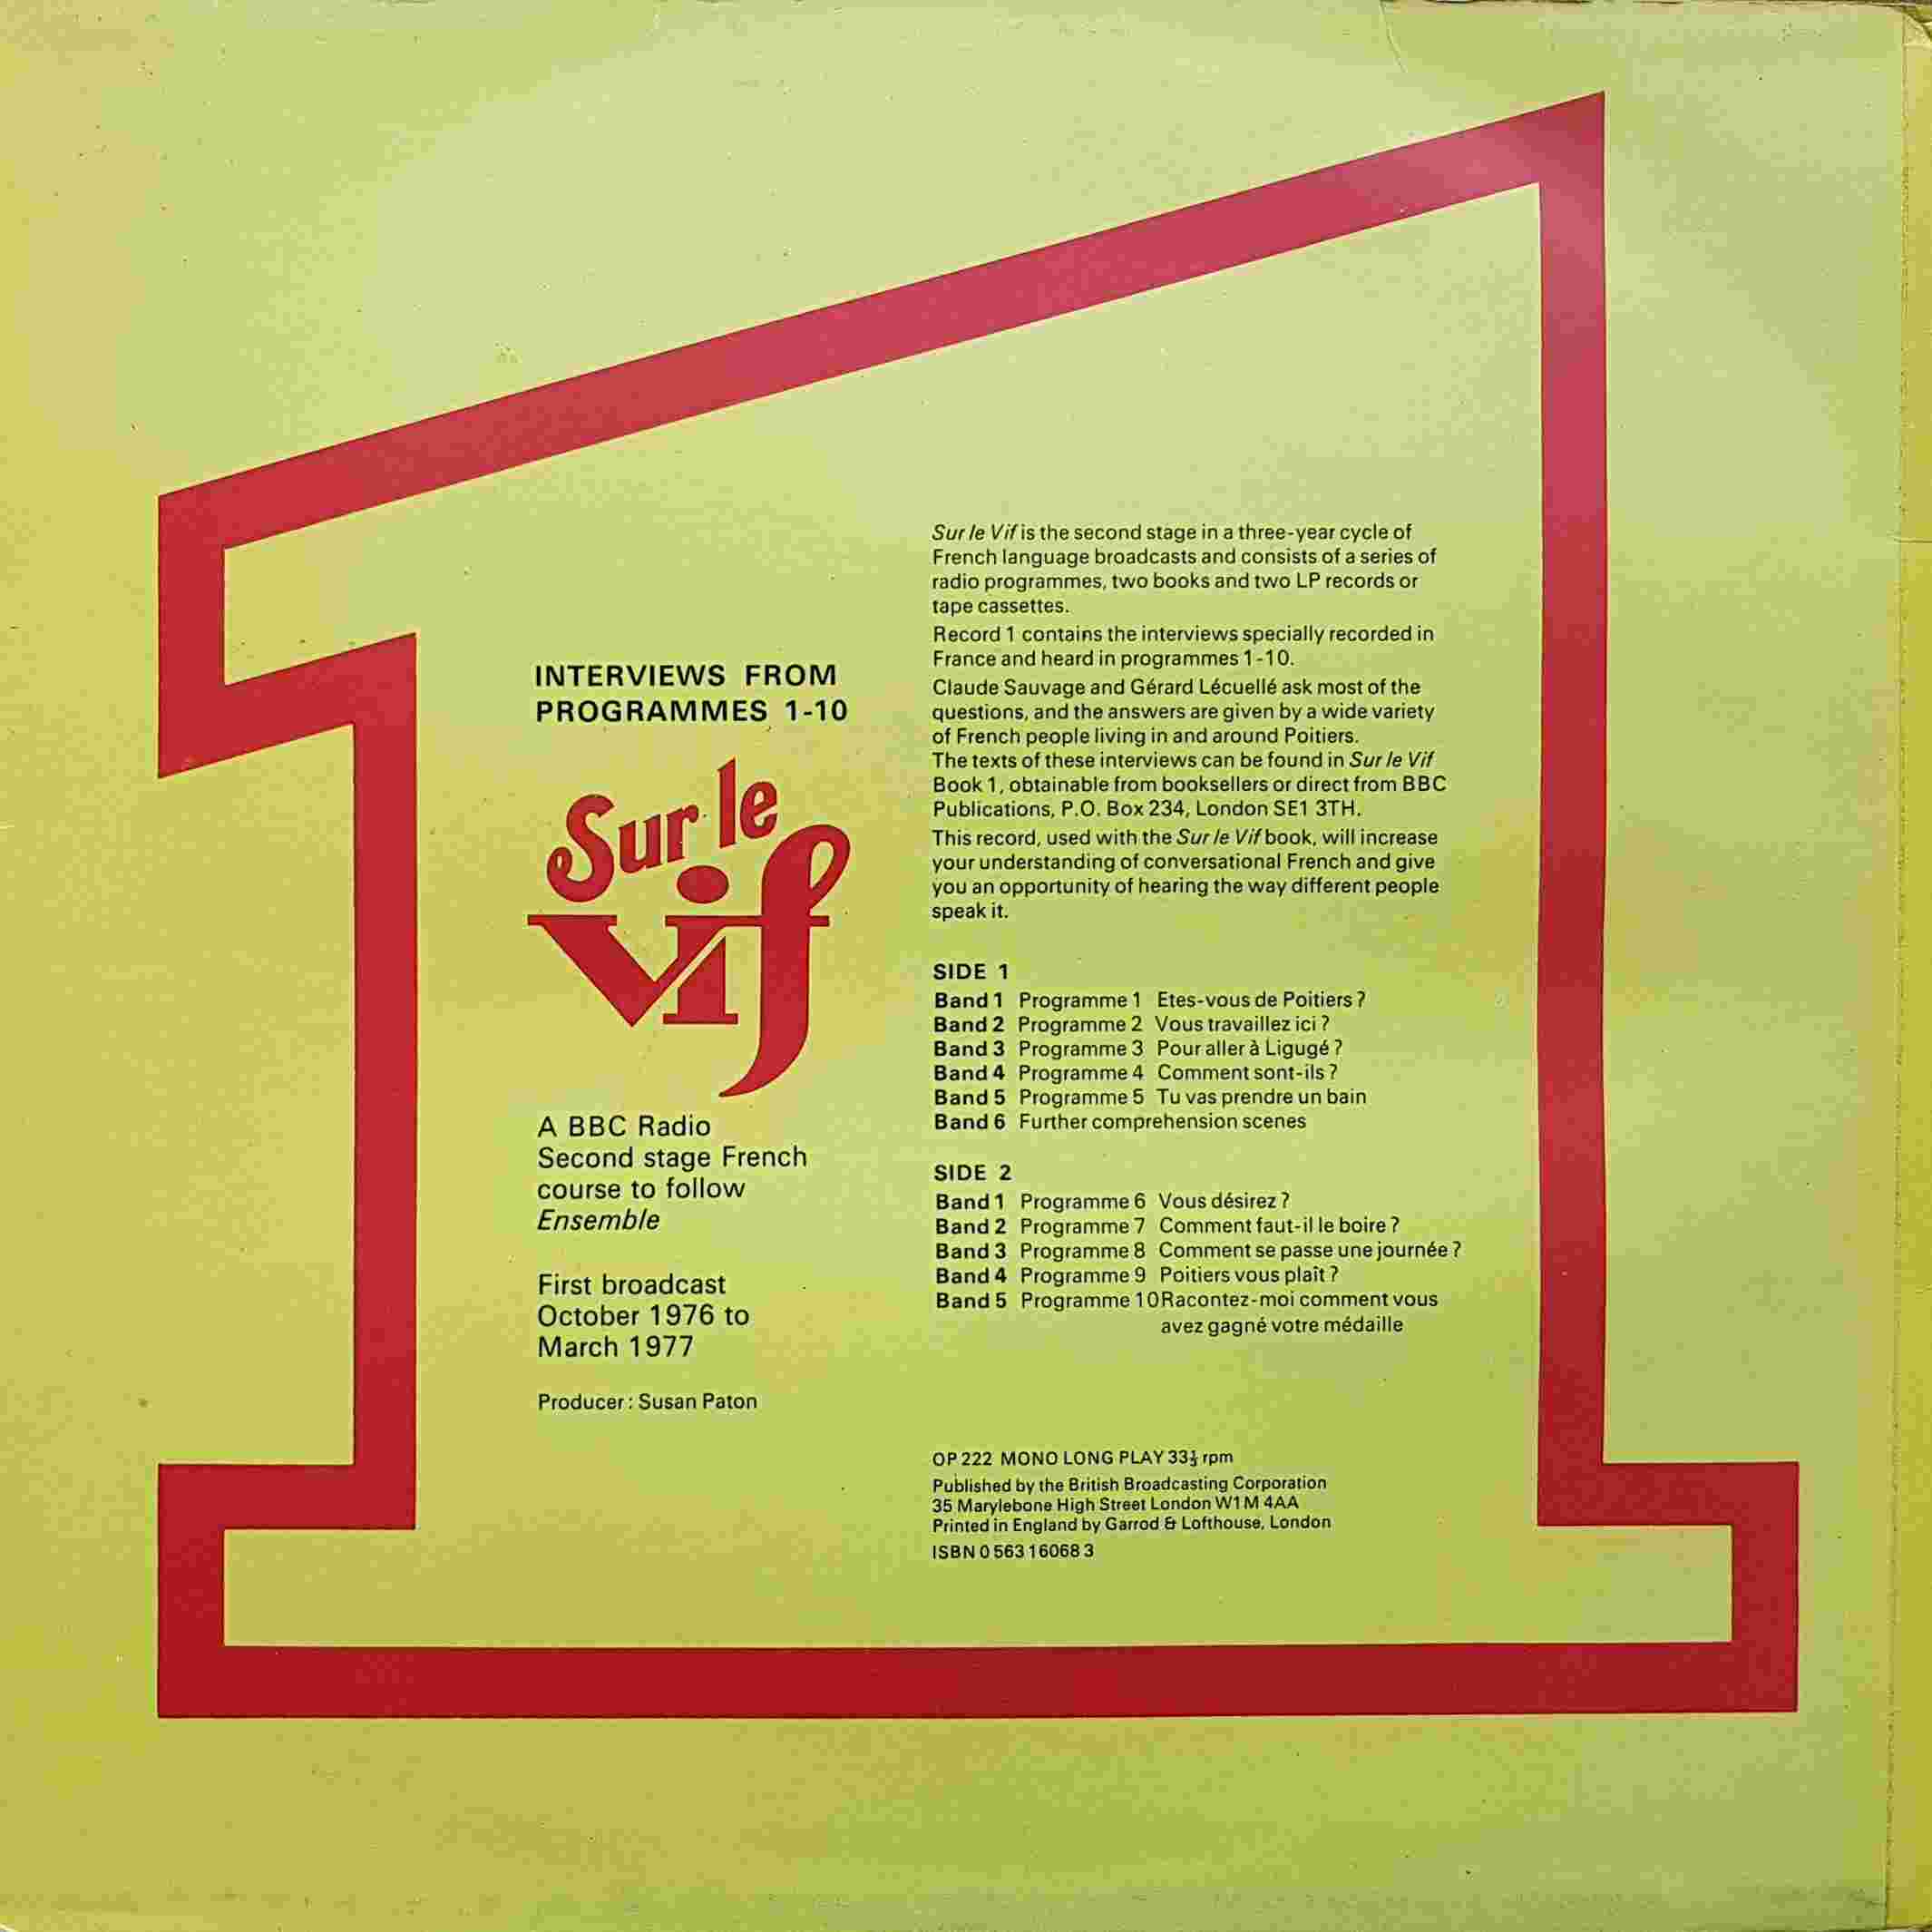 Picture of OP 222 Sur le vif 1 - Second stage French course - Programmes 1 - 10 by artist Various from the BBC records and Tapes library